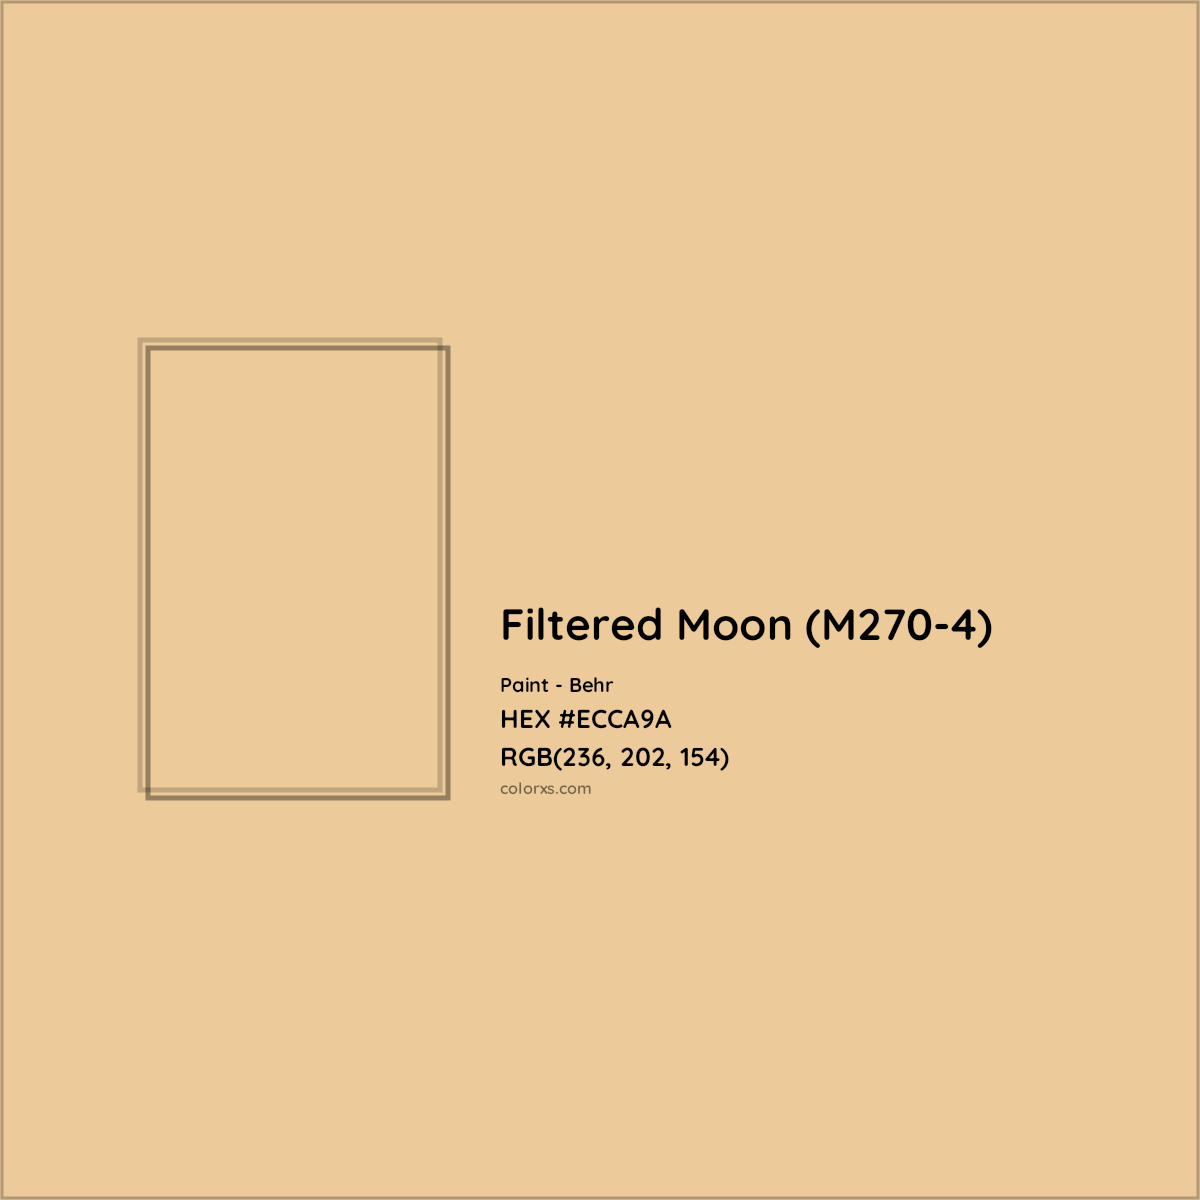 HEX #ECCA9A Filtered Moon (M270-4) Paint Behr - Color Code